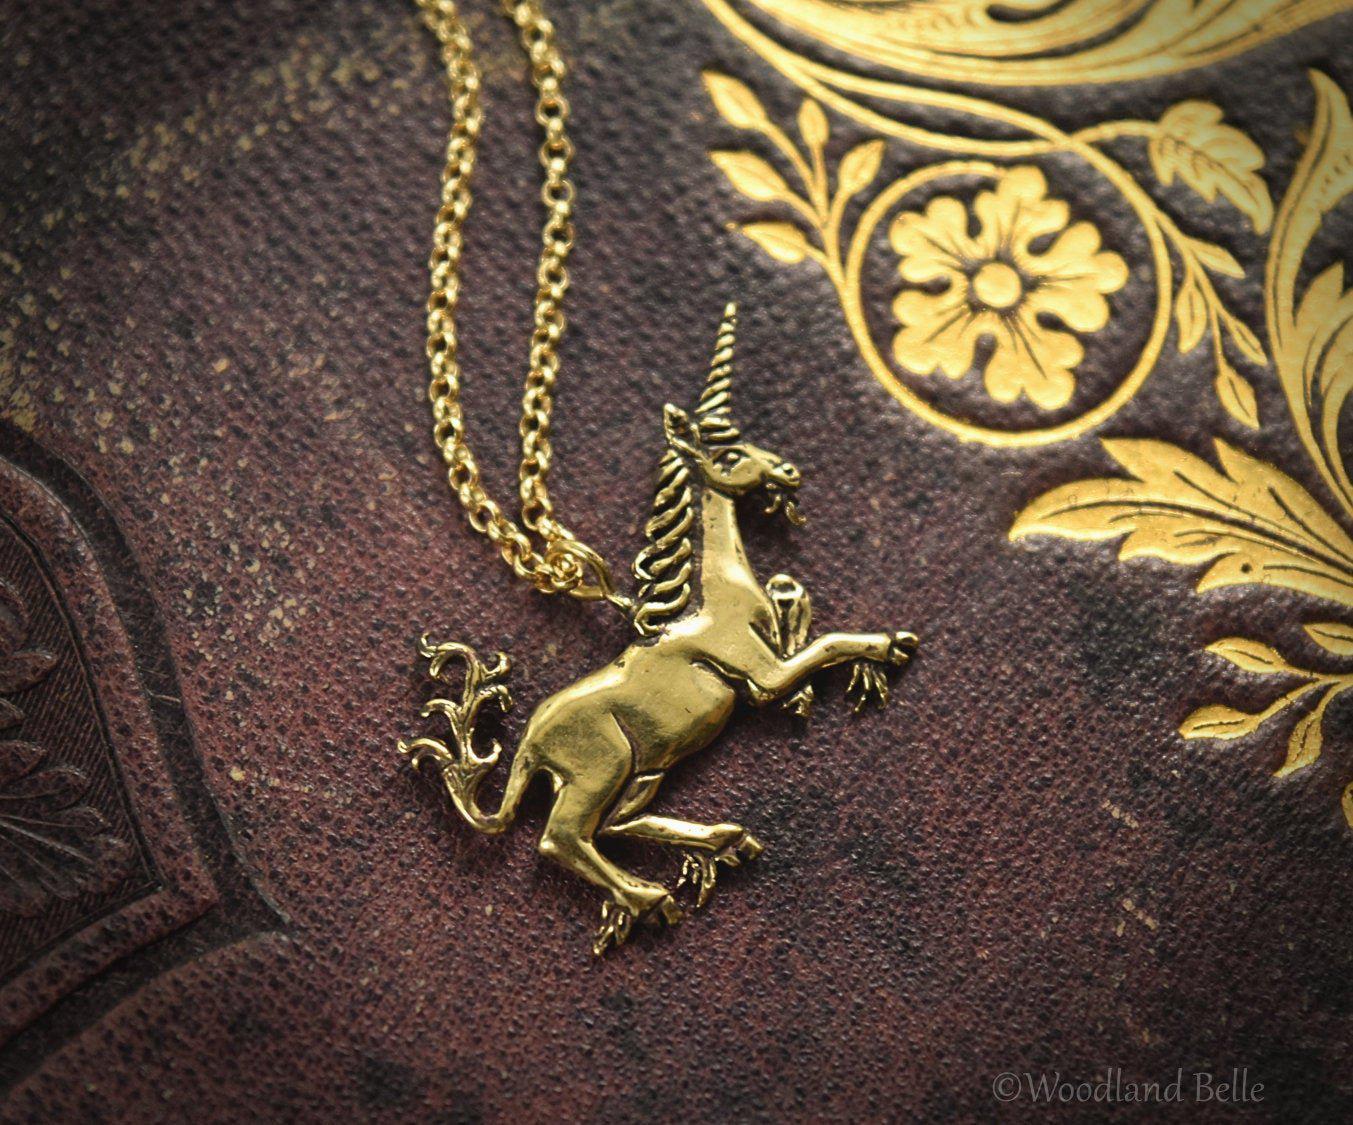 Medieval Unicorn Necklace - Sterling Silver Unicorn Pendant, Recycled - Small Dainty Charm Necklace - Unicorn Lover Gift - by Woodland Belle